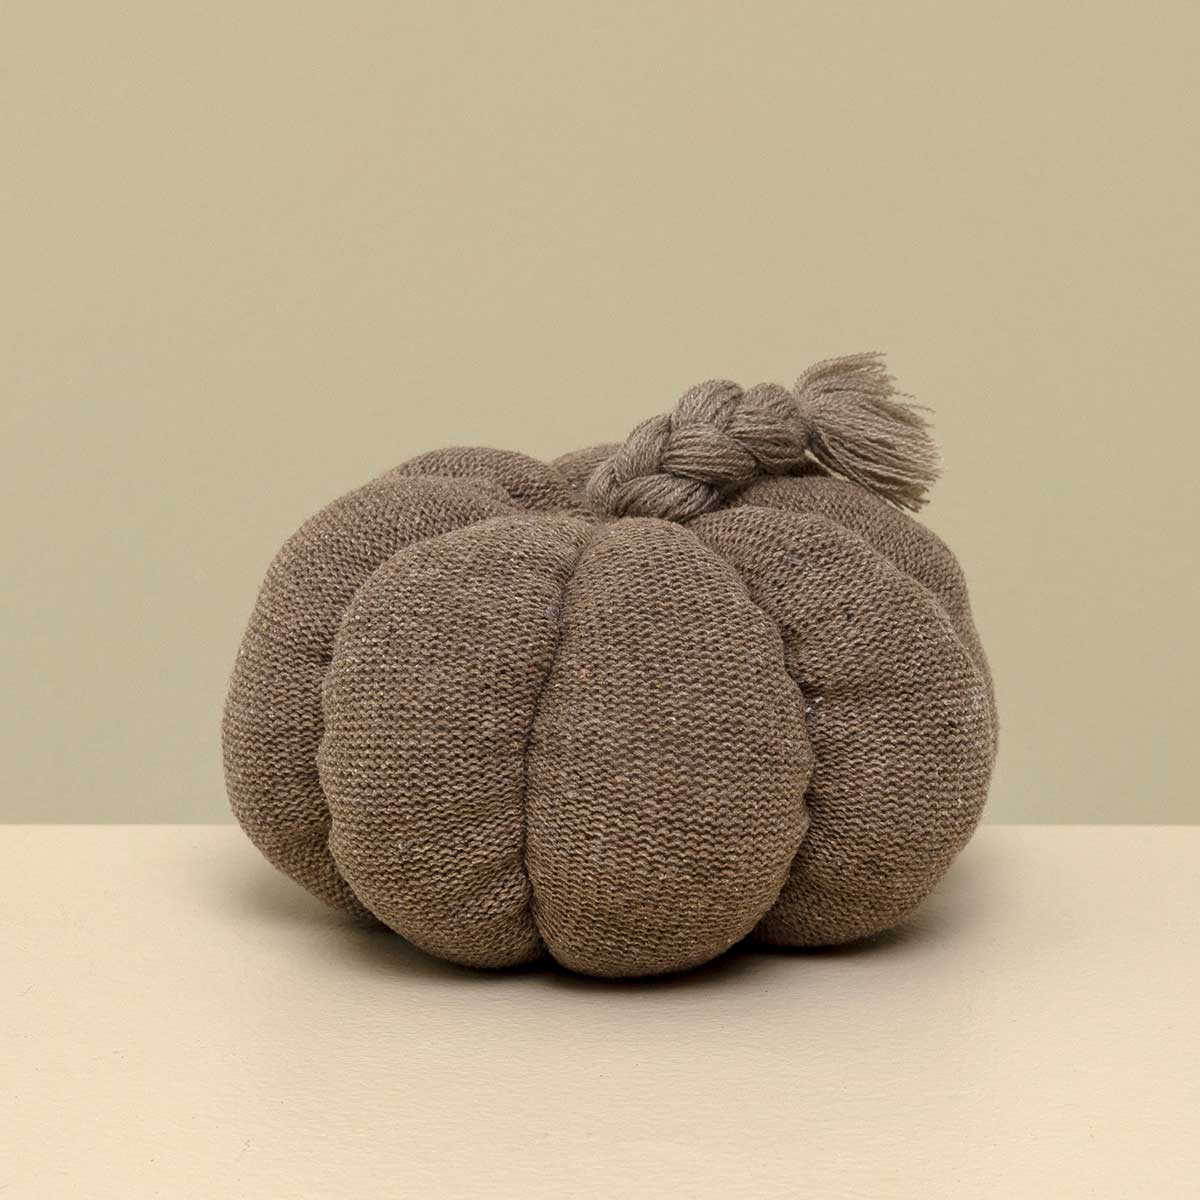 KNIT PUMPKIN PLUSH TAUPE WITH BRAIDED STEM LARGE 7"X4" - Click Image to Close